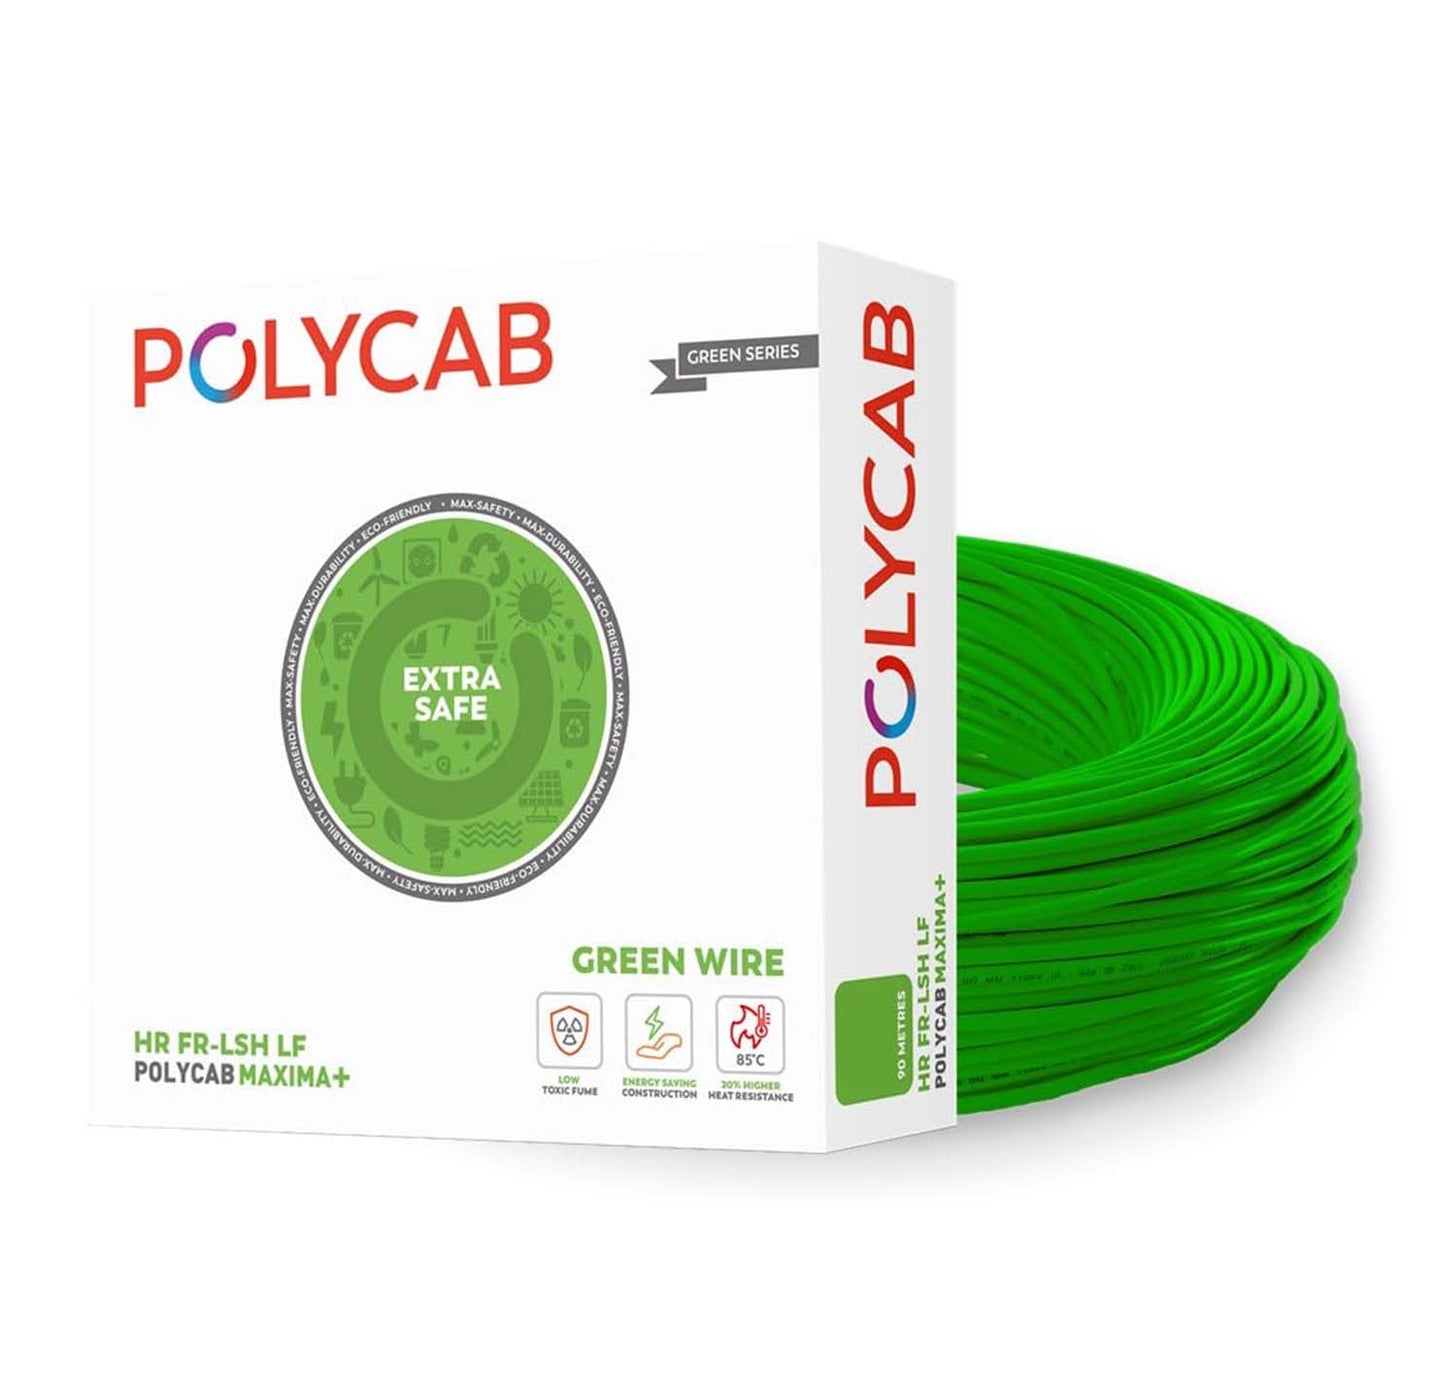 Polycab Maxima+ Domestic Electrical Wire - 90 Meter - Green Wire